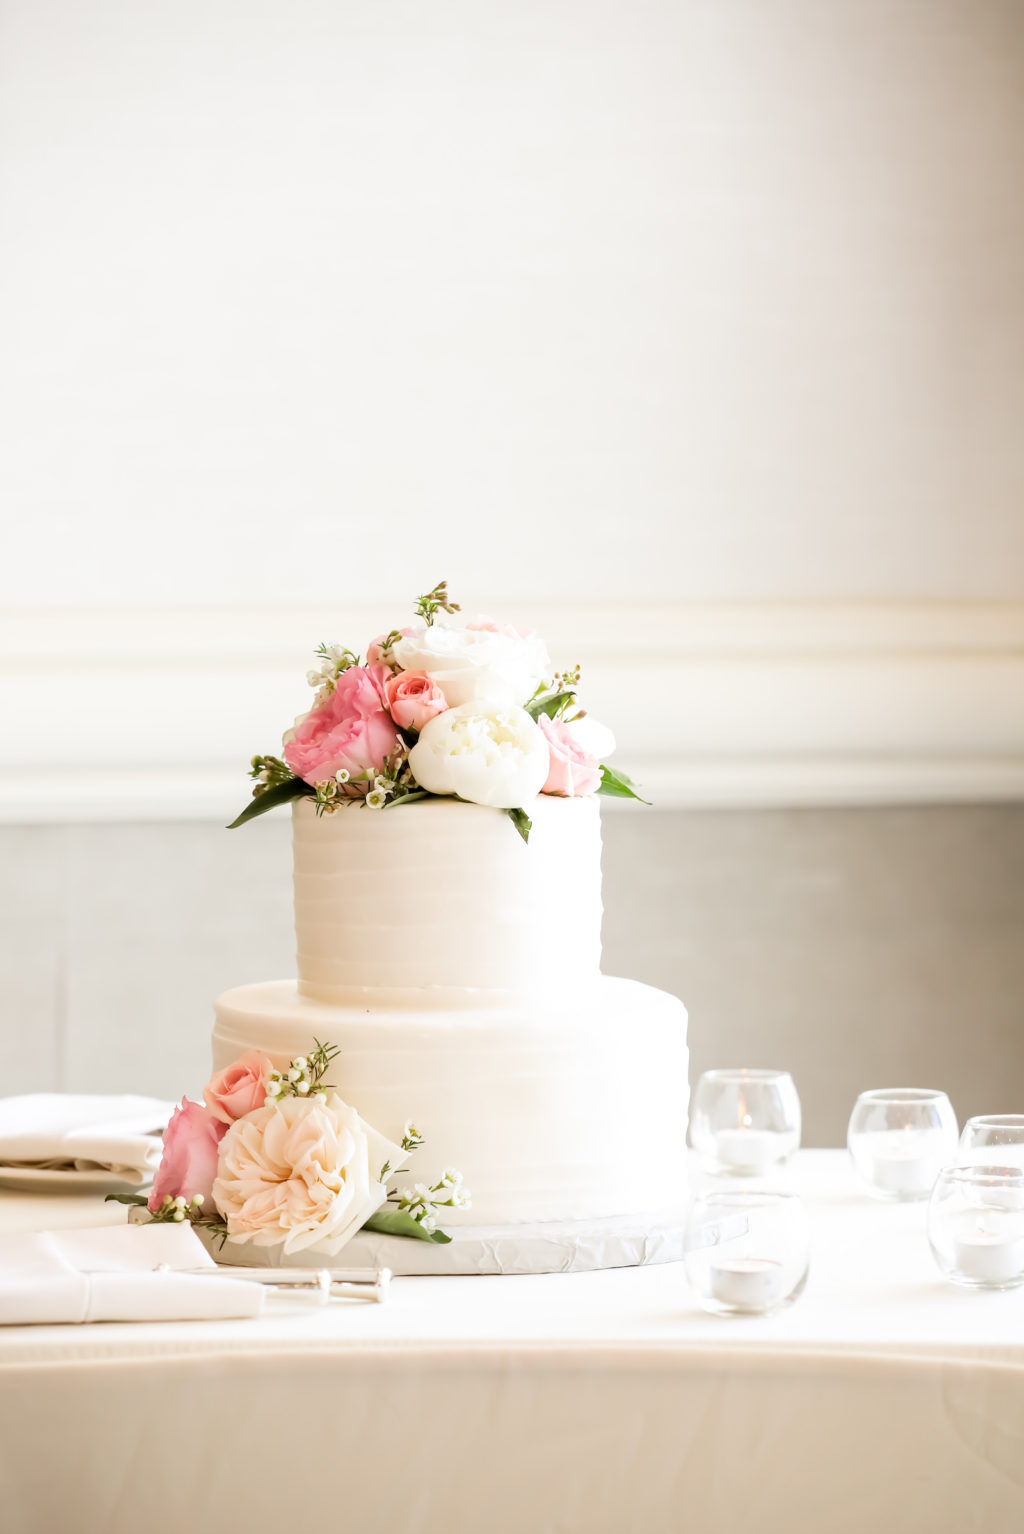 Simple Classic Two Tier Round Buttercream Wedding Cake with Fresh Flower Blush Pink Roses and White Garden Roses